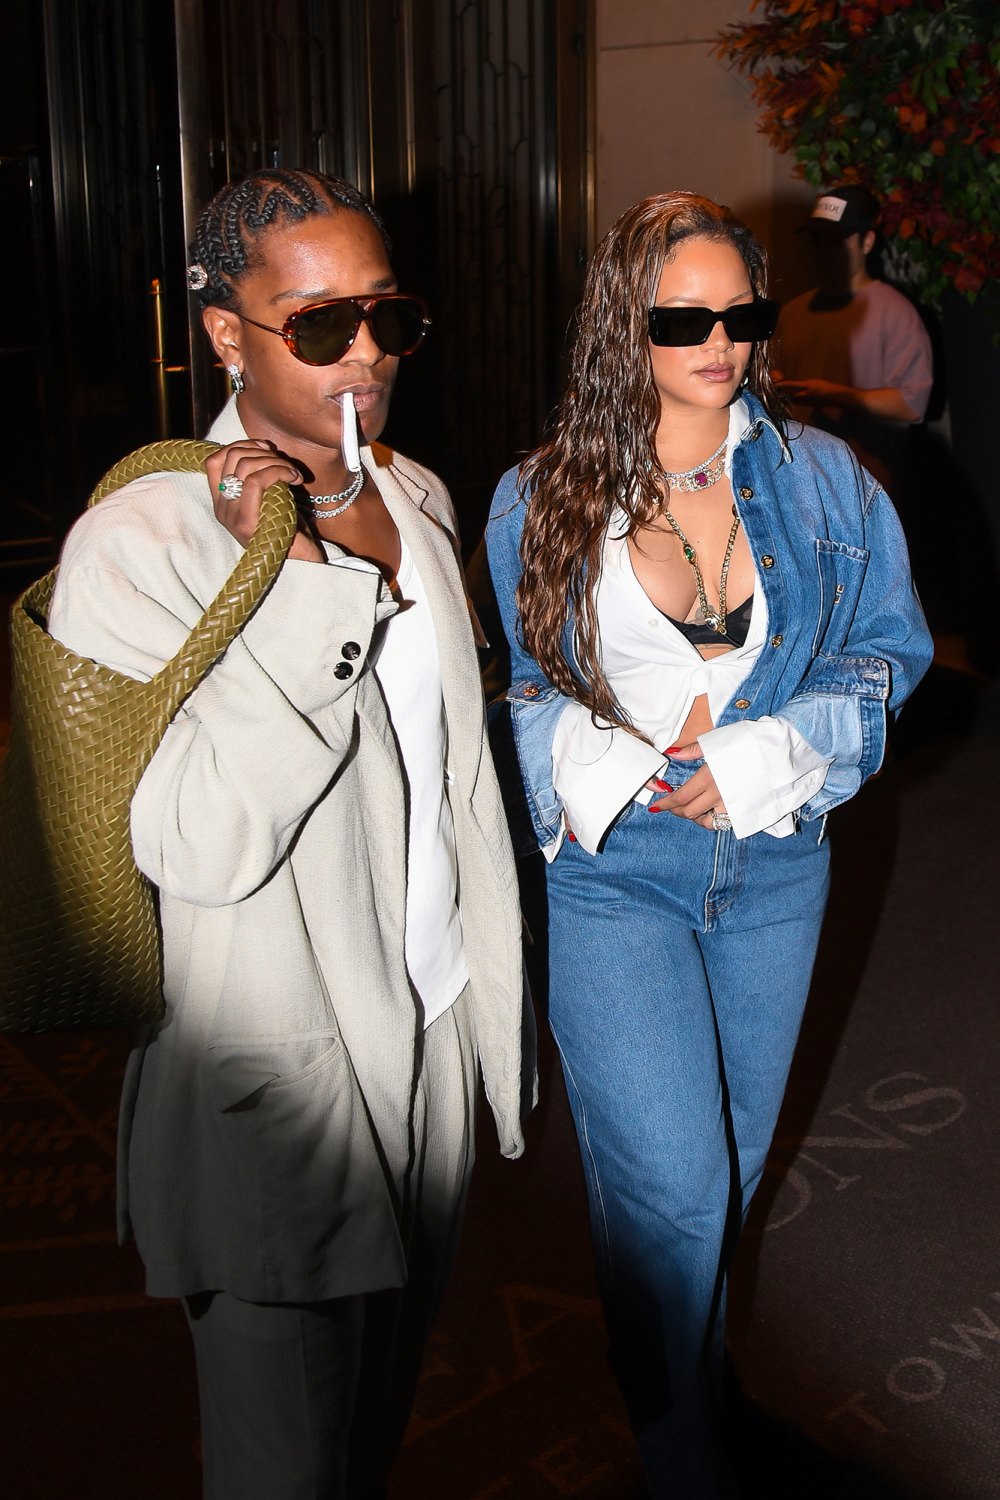 Rihanna Rocks Double Denim Like Only She Can During Date Night With Boyfriend ASAP Rocky